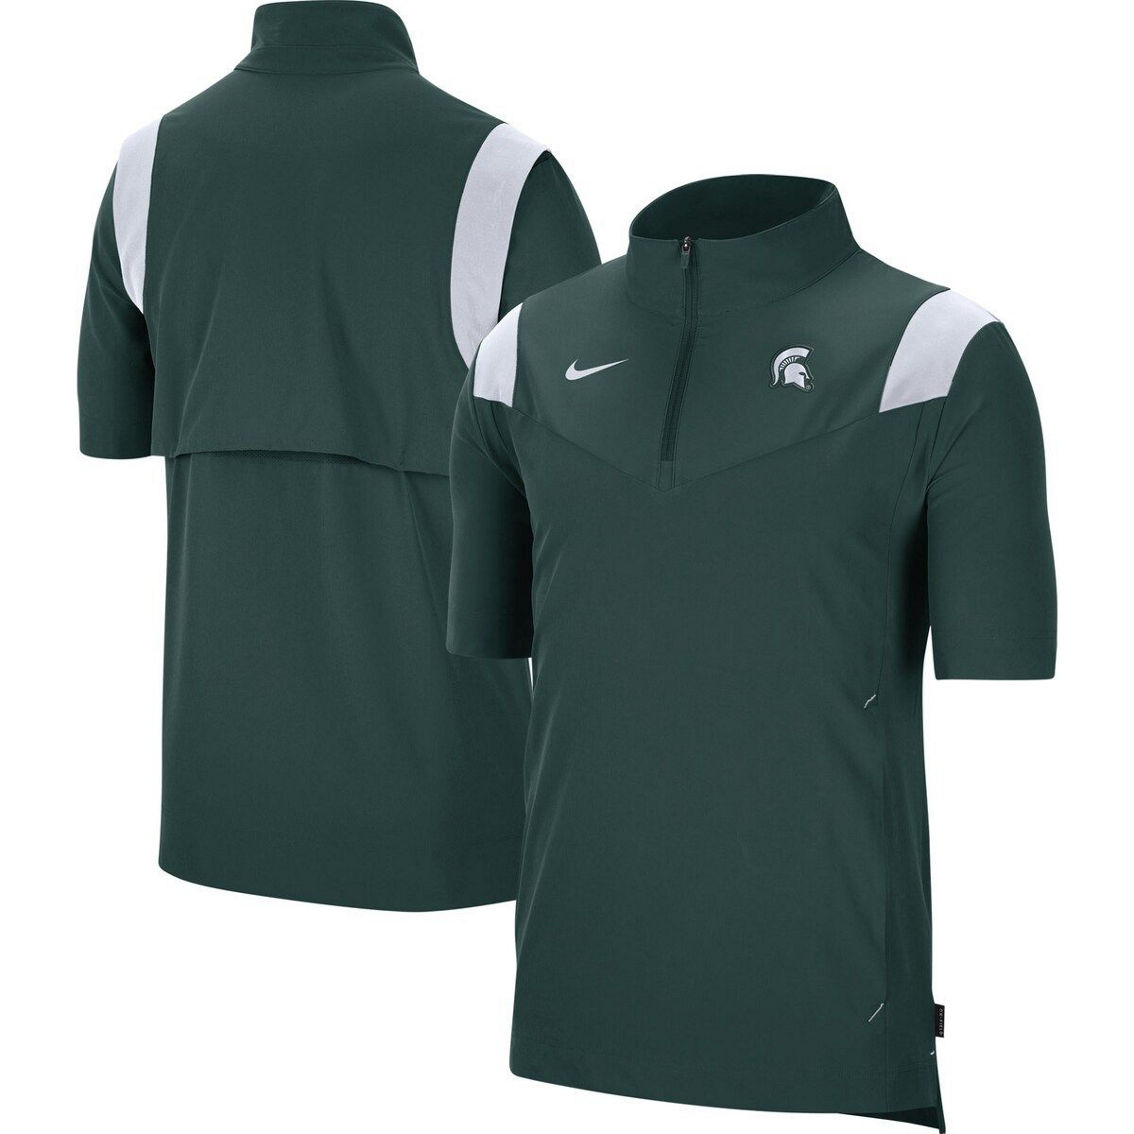 Nike Men's Green Michigan State Spartans 2021 Coaches Short Sleeve Quarter-Zip Jacket - Image 2 of 4